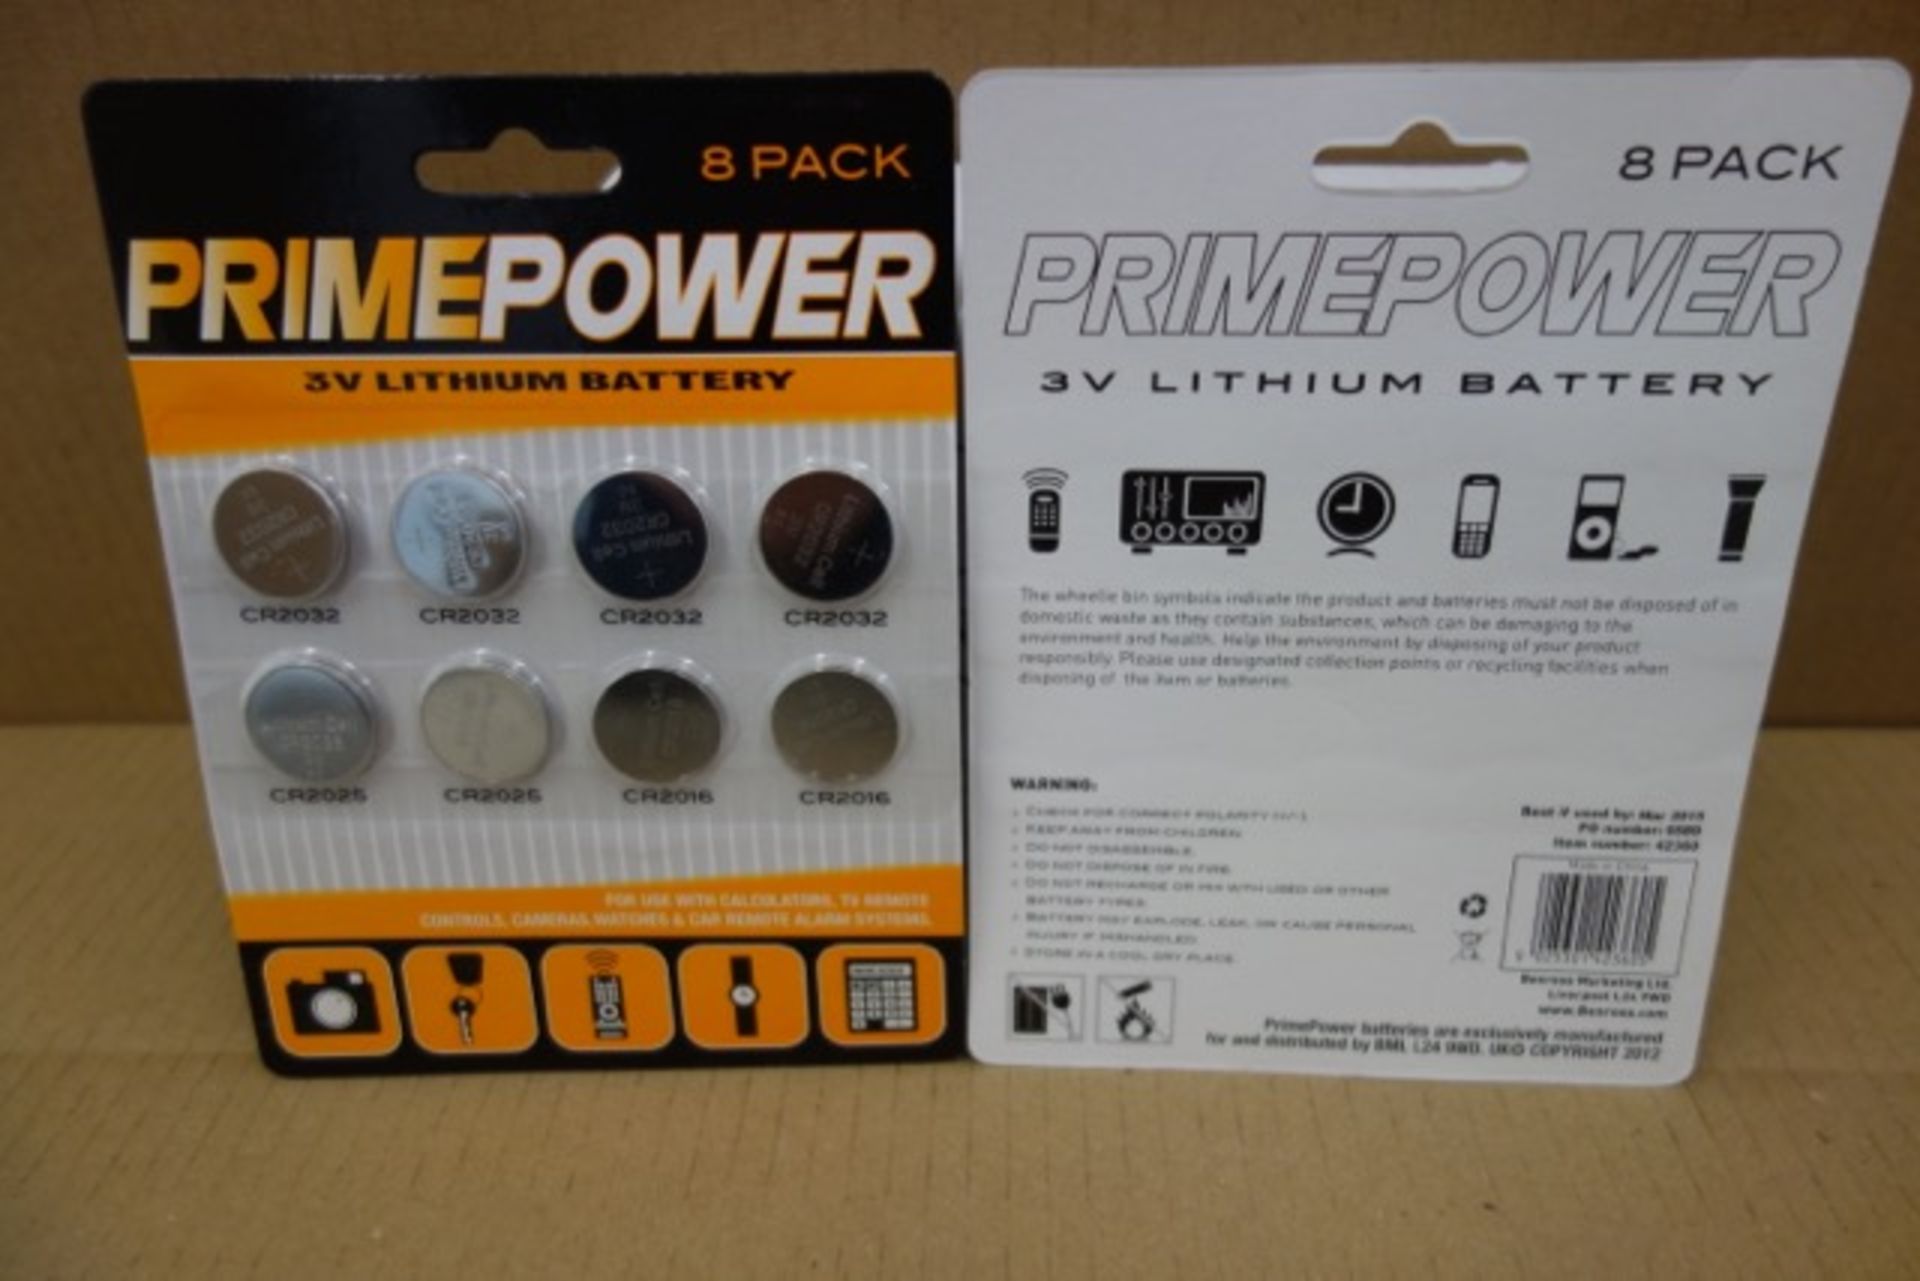 240 x Prime Power 8 Pack 3V Litium Battery Packs. Use to power: Watches, Calculators, TV Remotes,